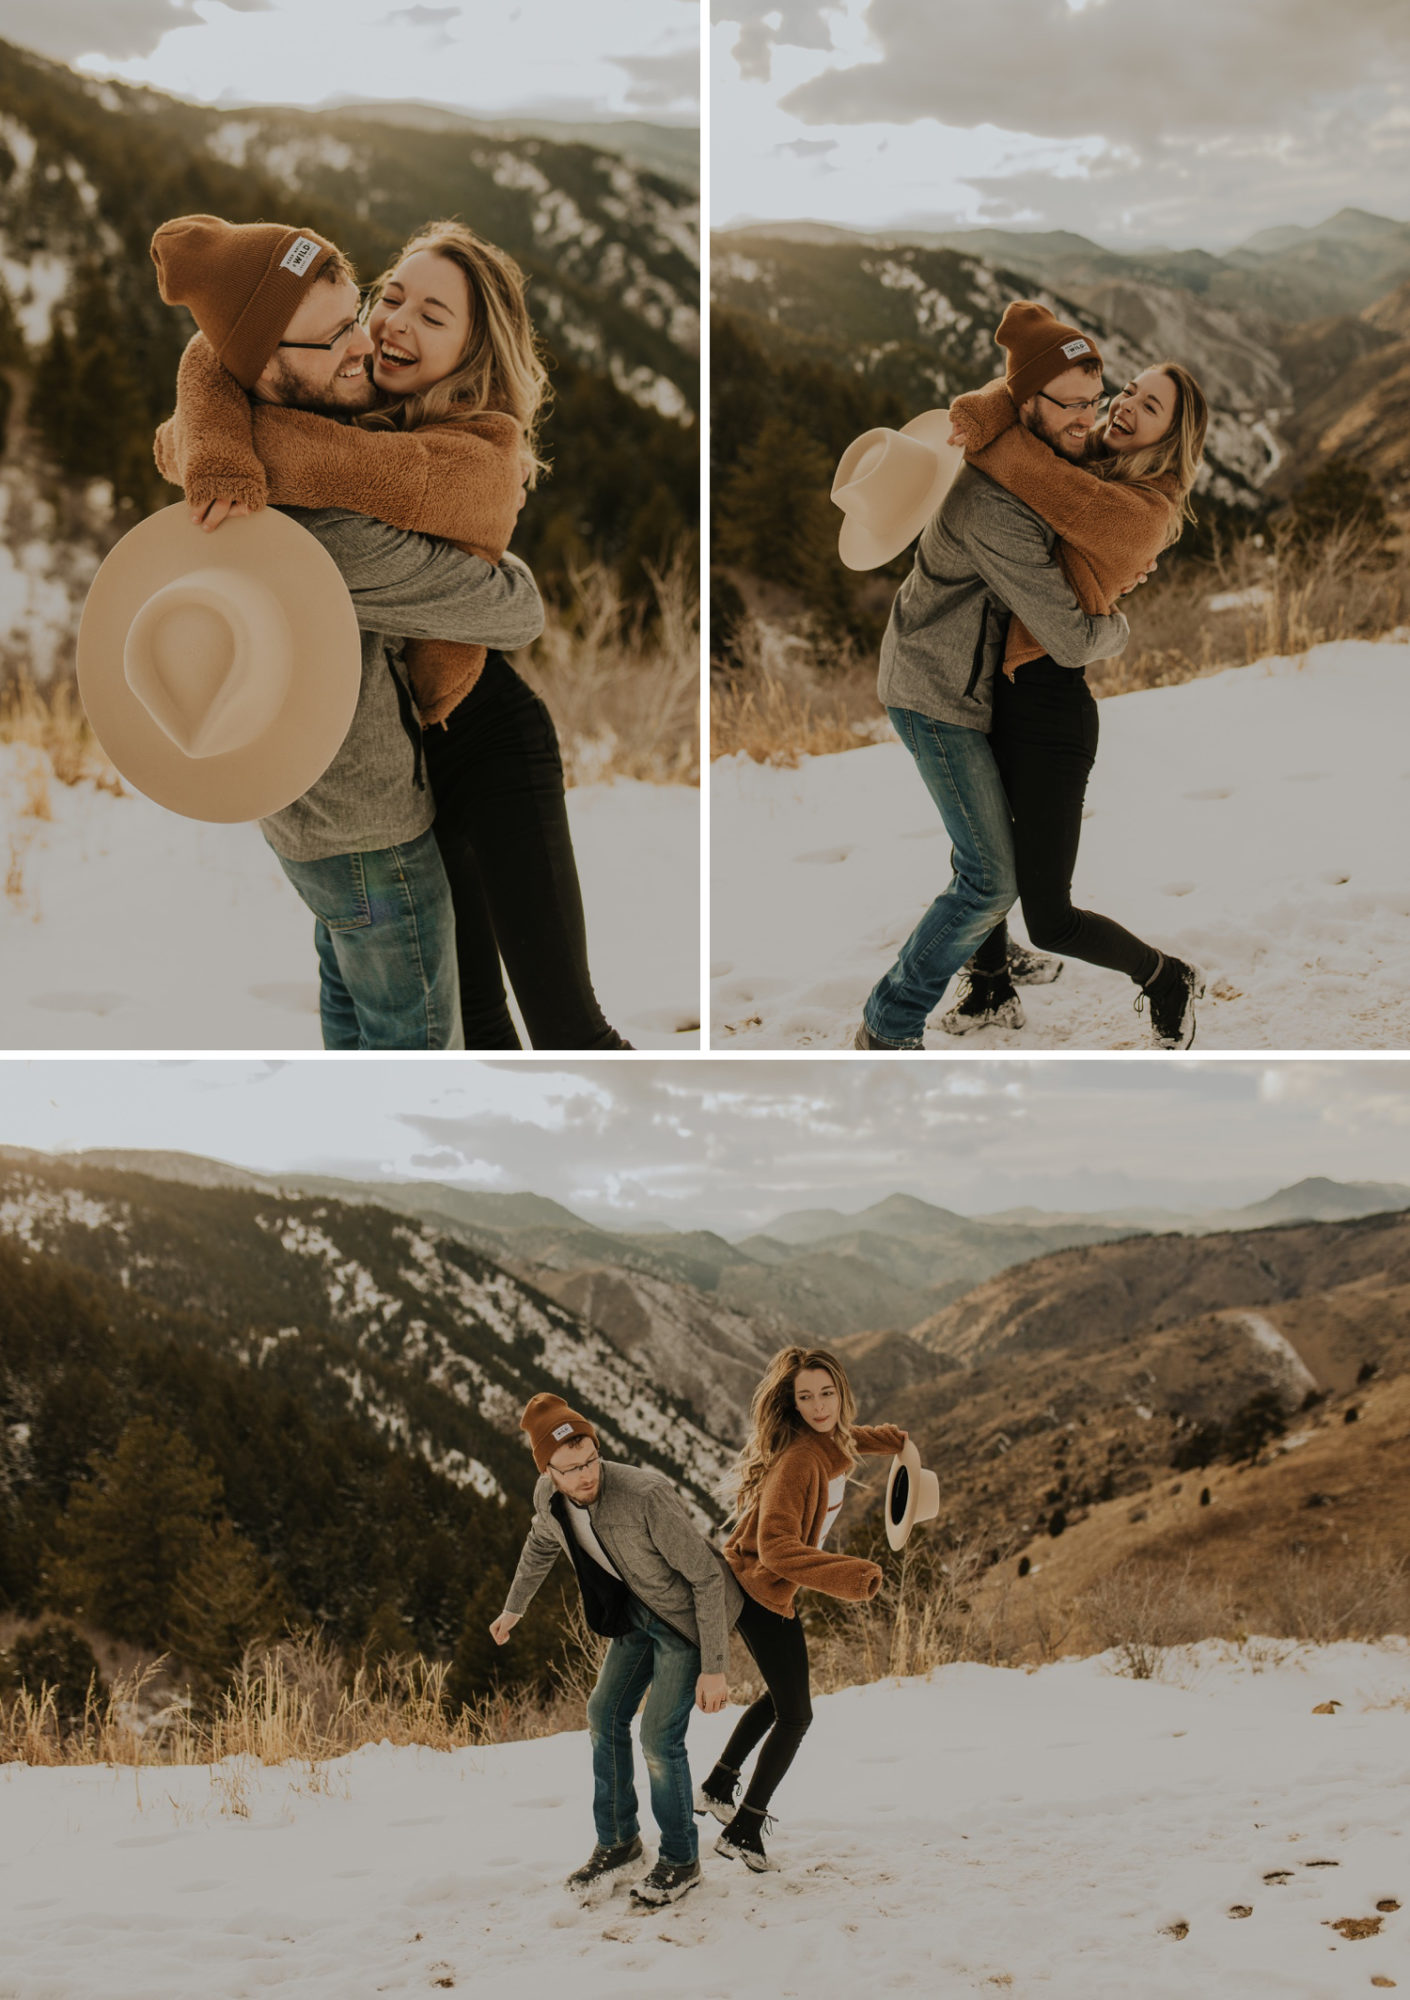 Colorado couples photoshoot in the mountains with photography business owner Becca Cannon.